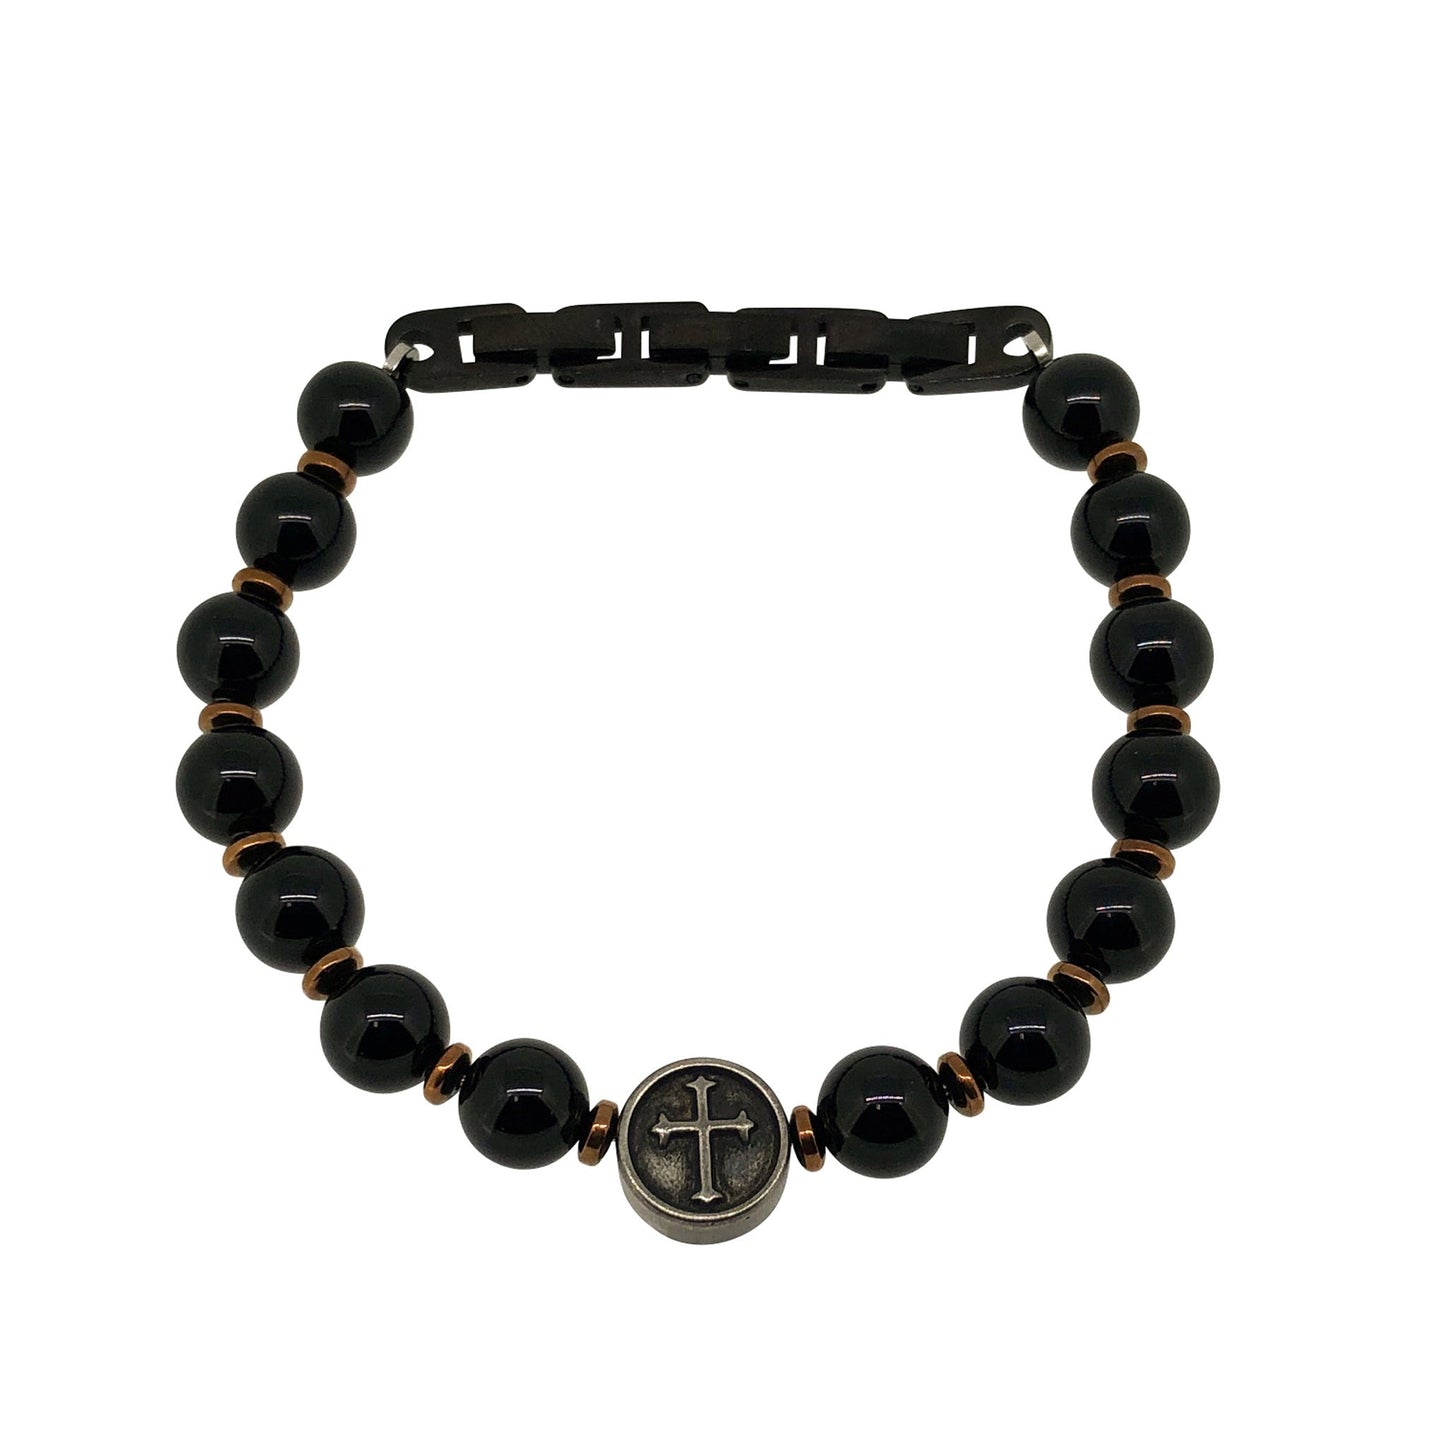 A black beaded stone bracelet with stainless steel cross displayed on a neutral white background.